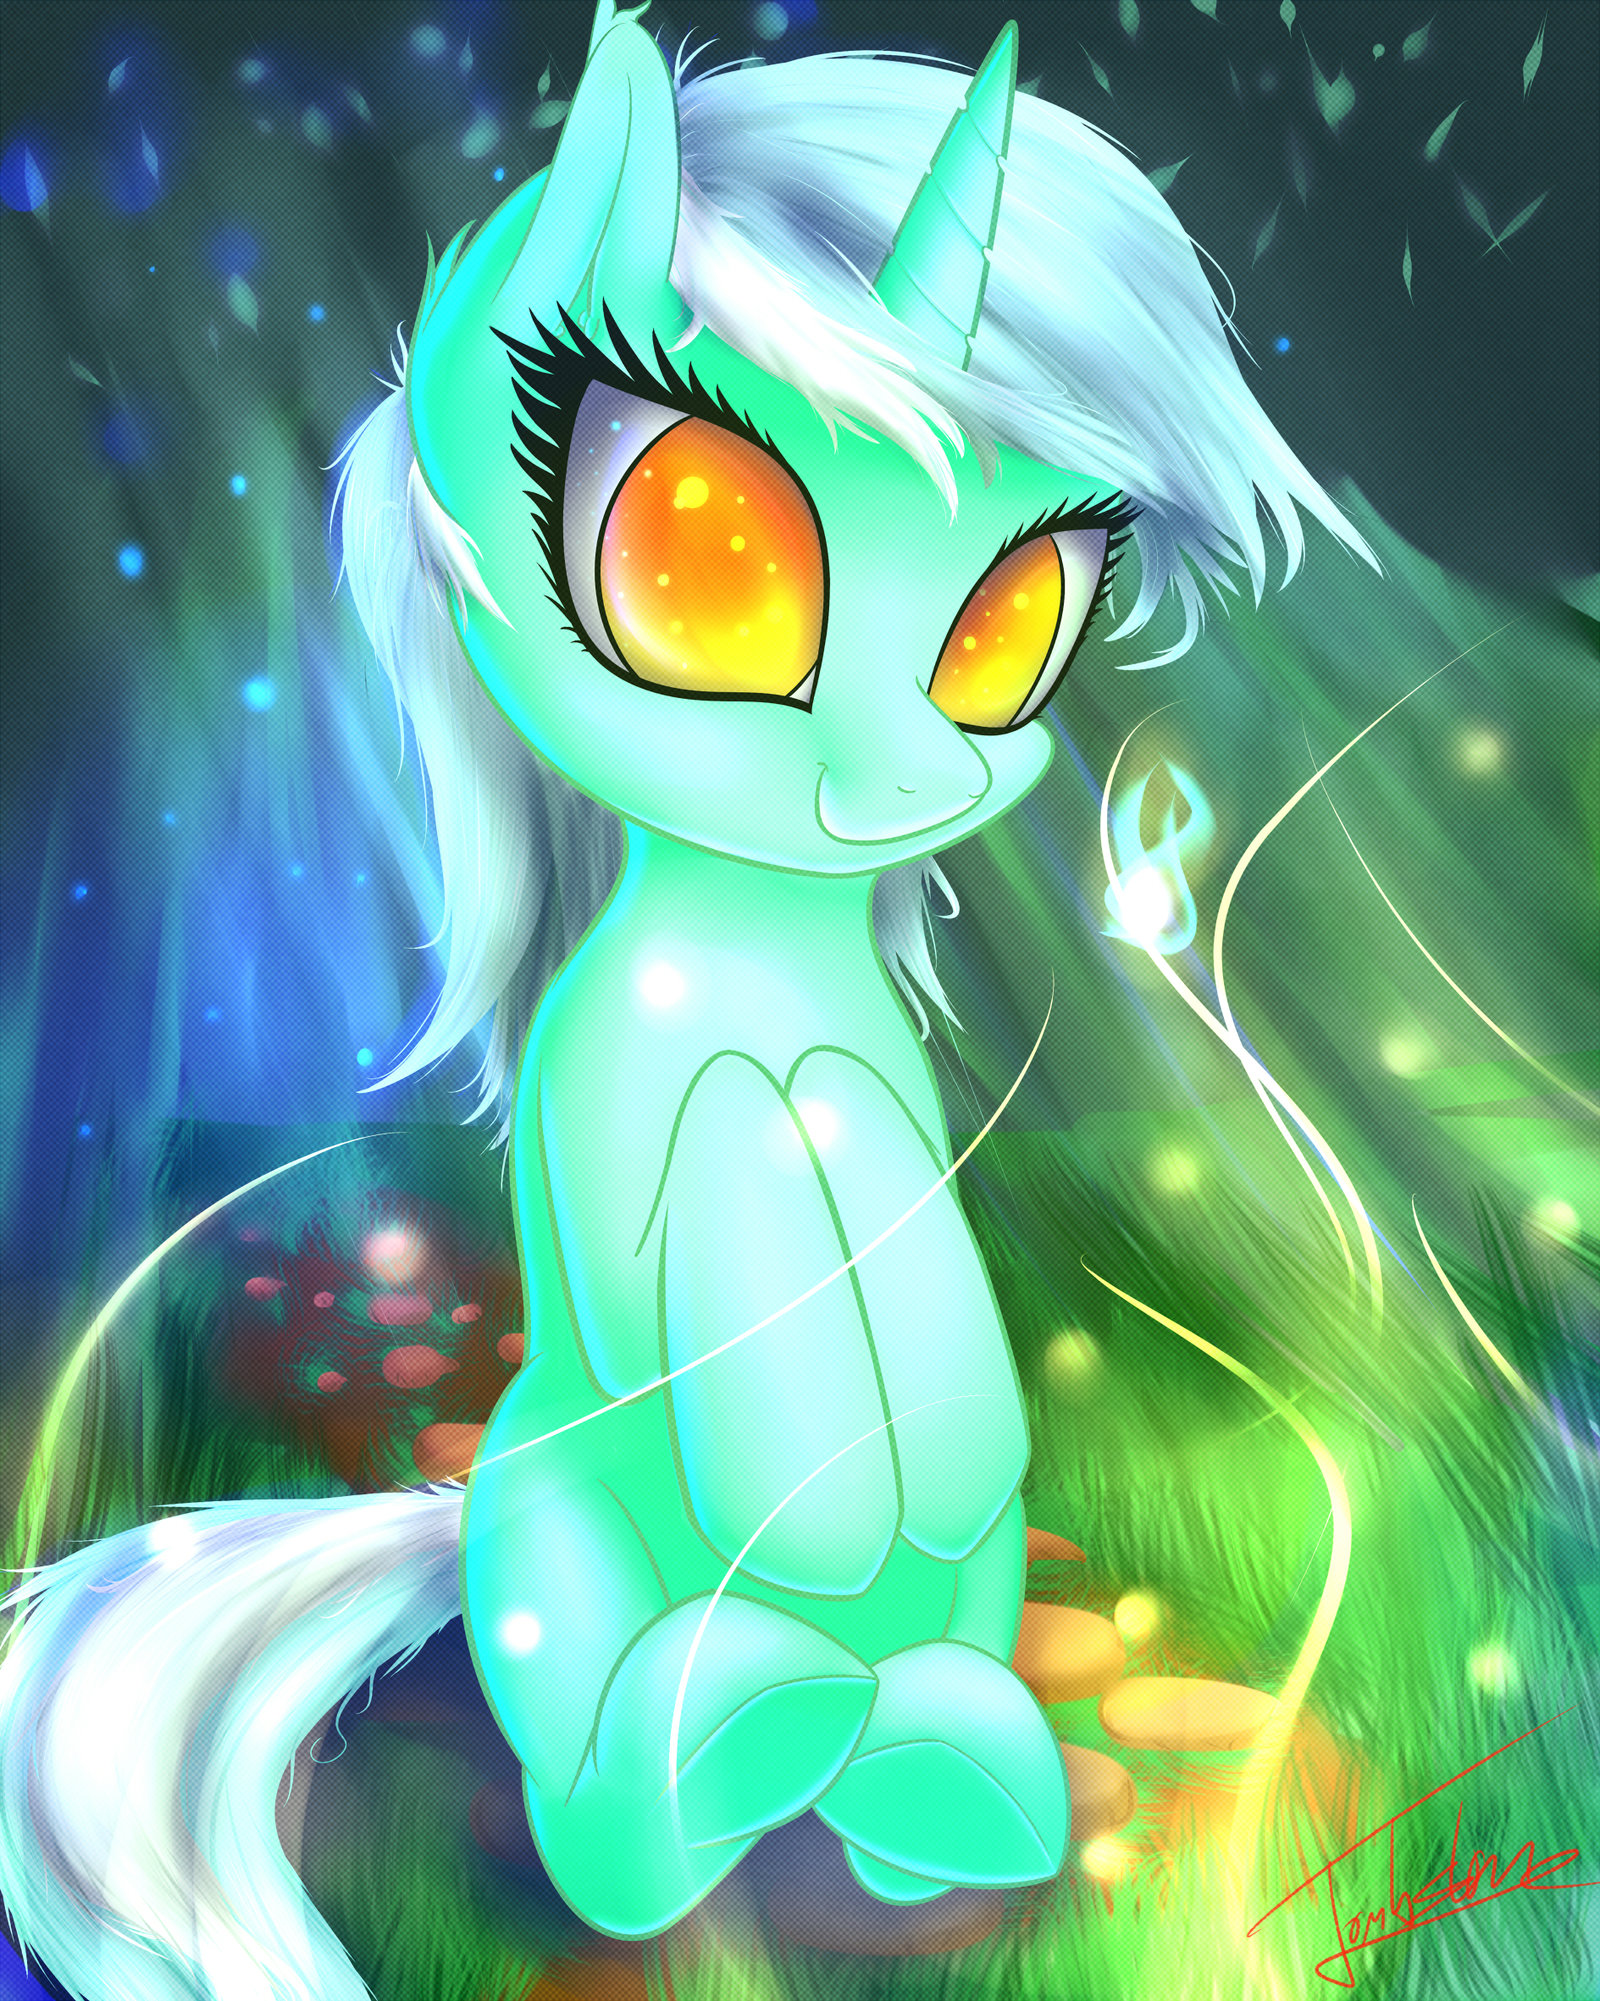 lyra__request__by_elzzombie-d8wlvr2.jpg